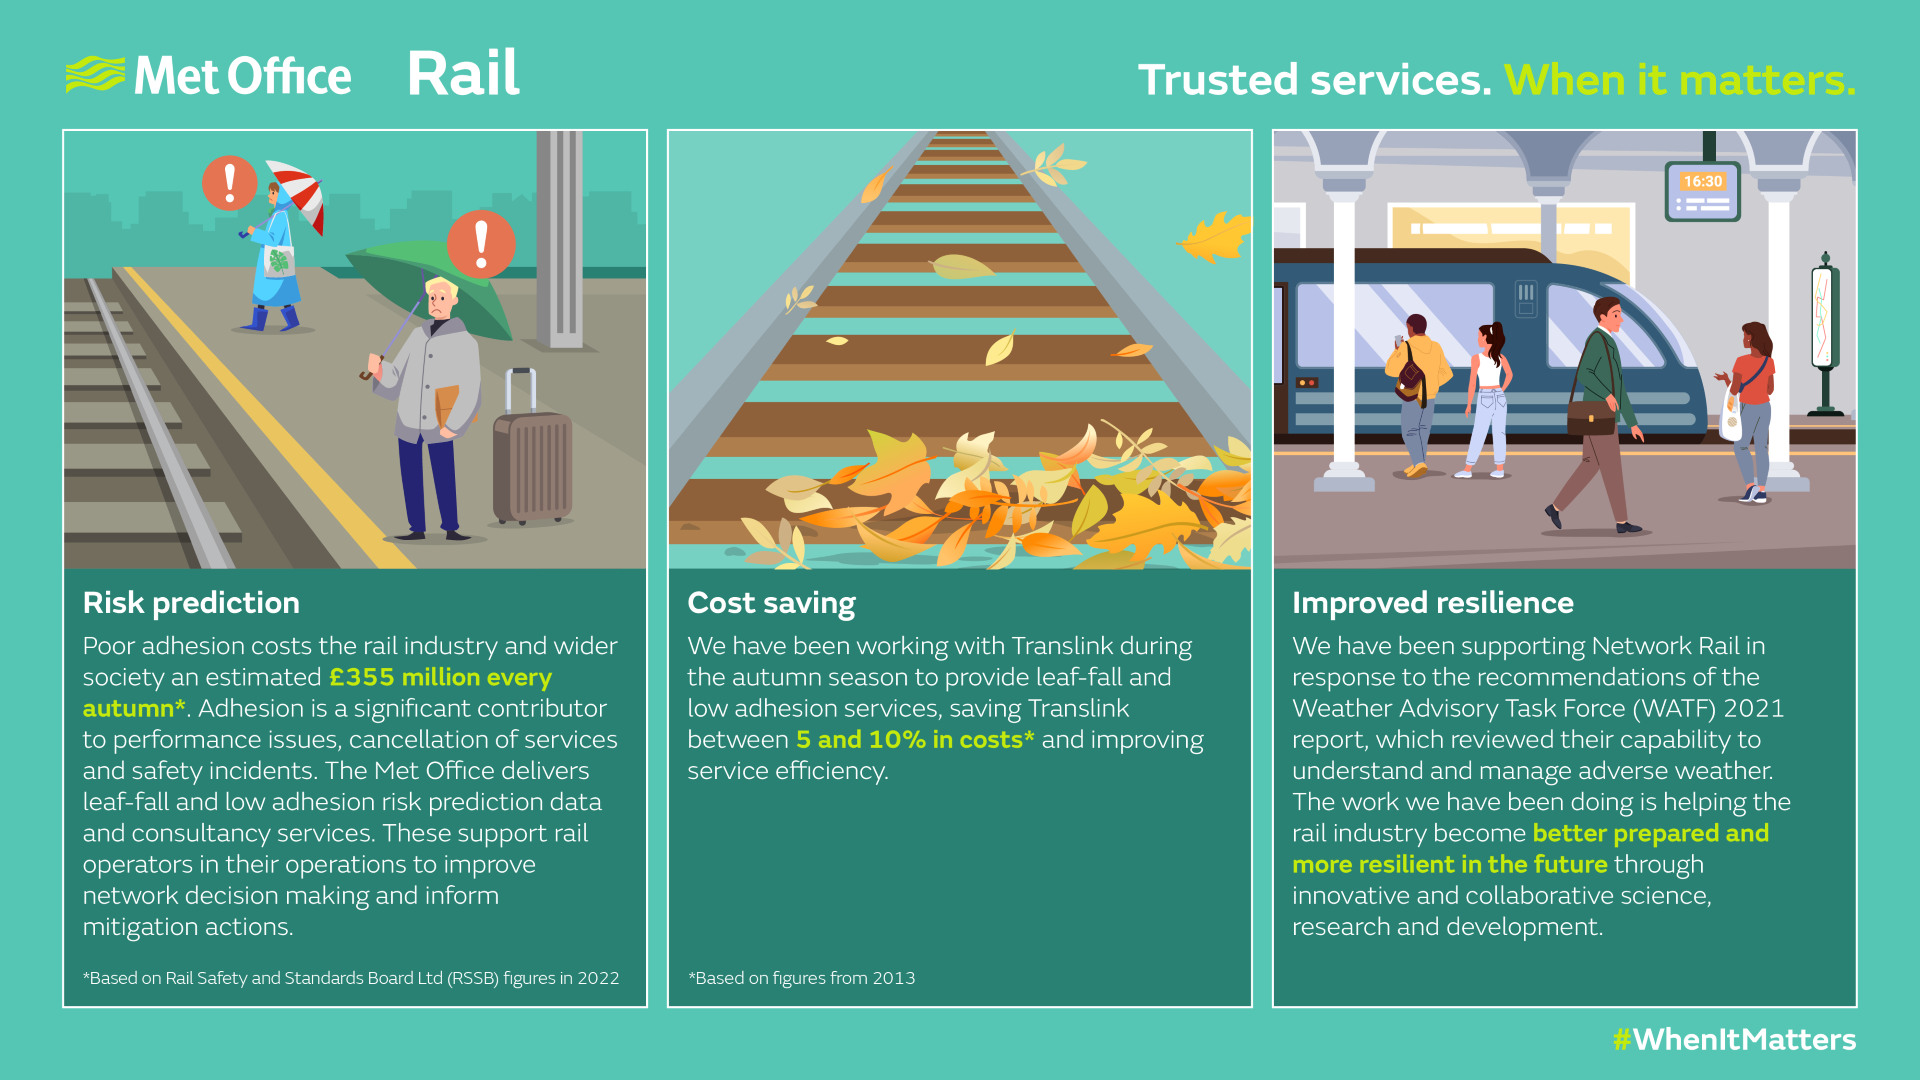 Met Office infographic for rail sector services